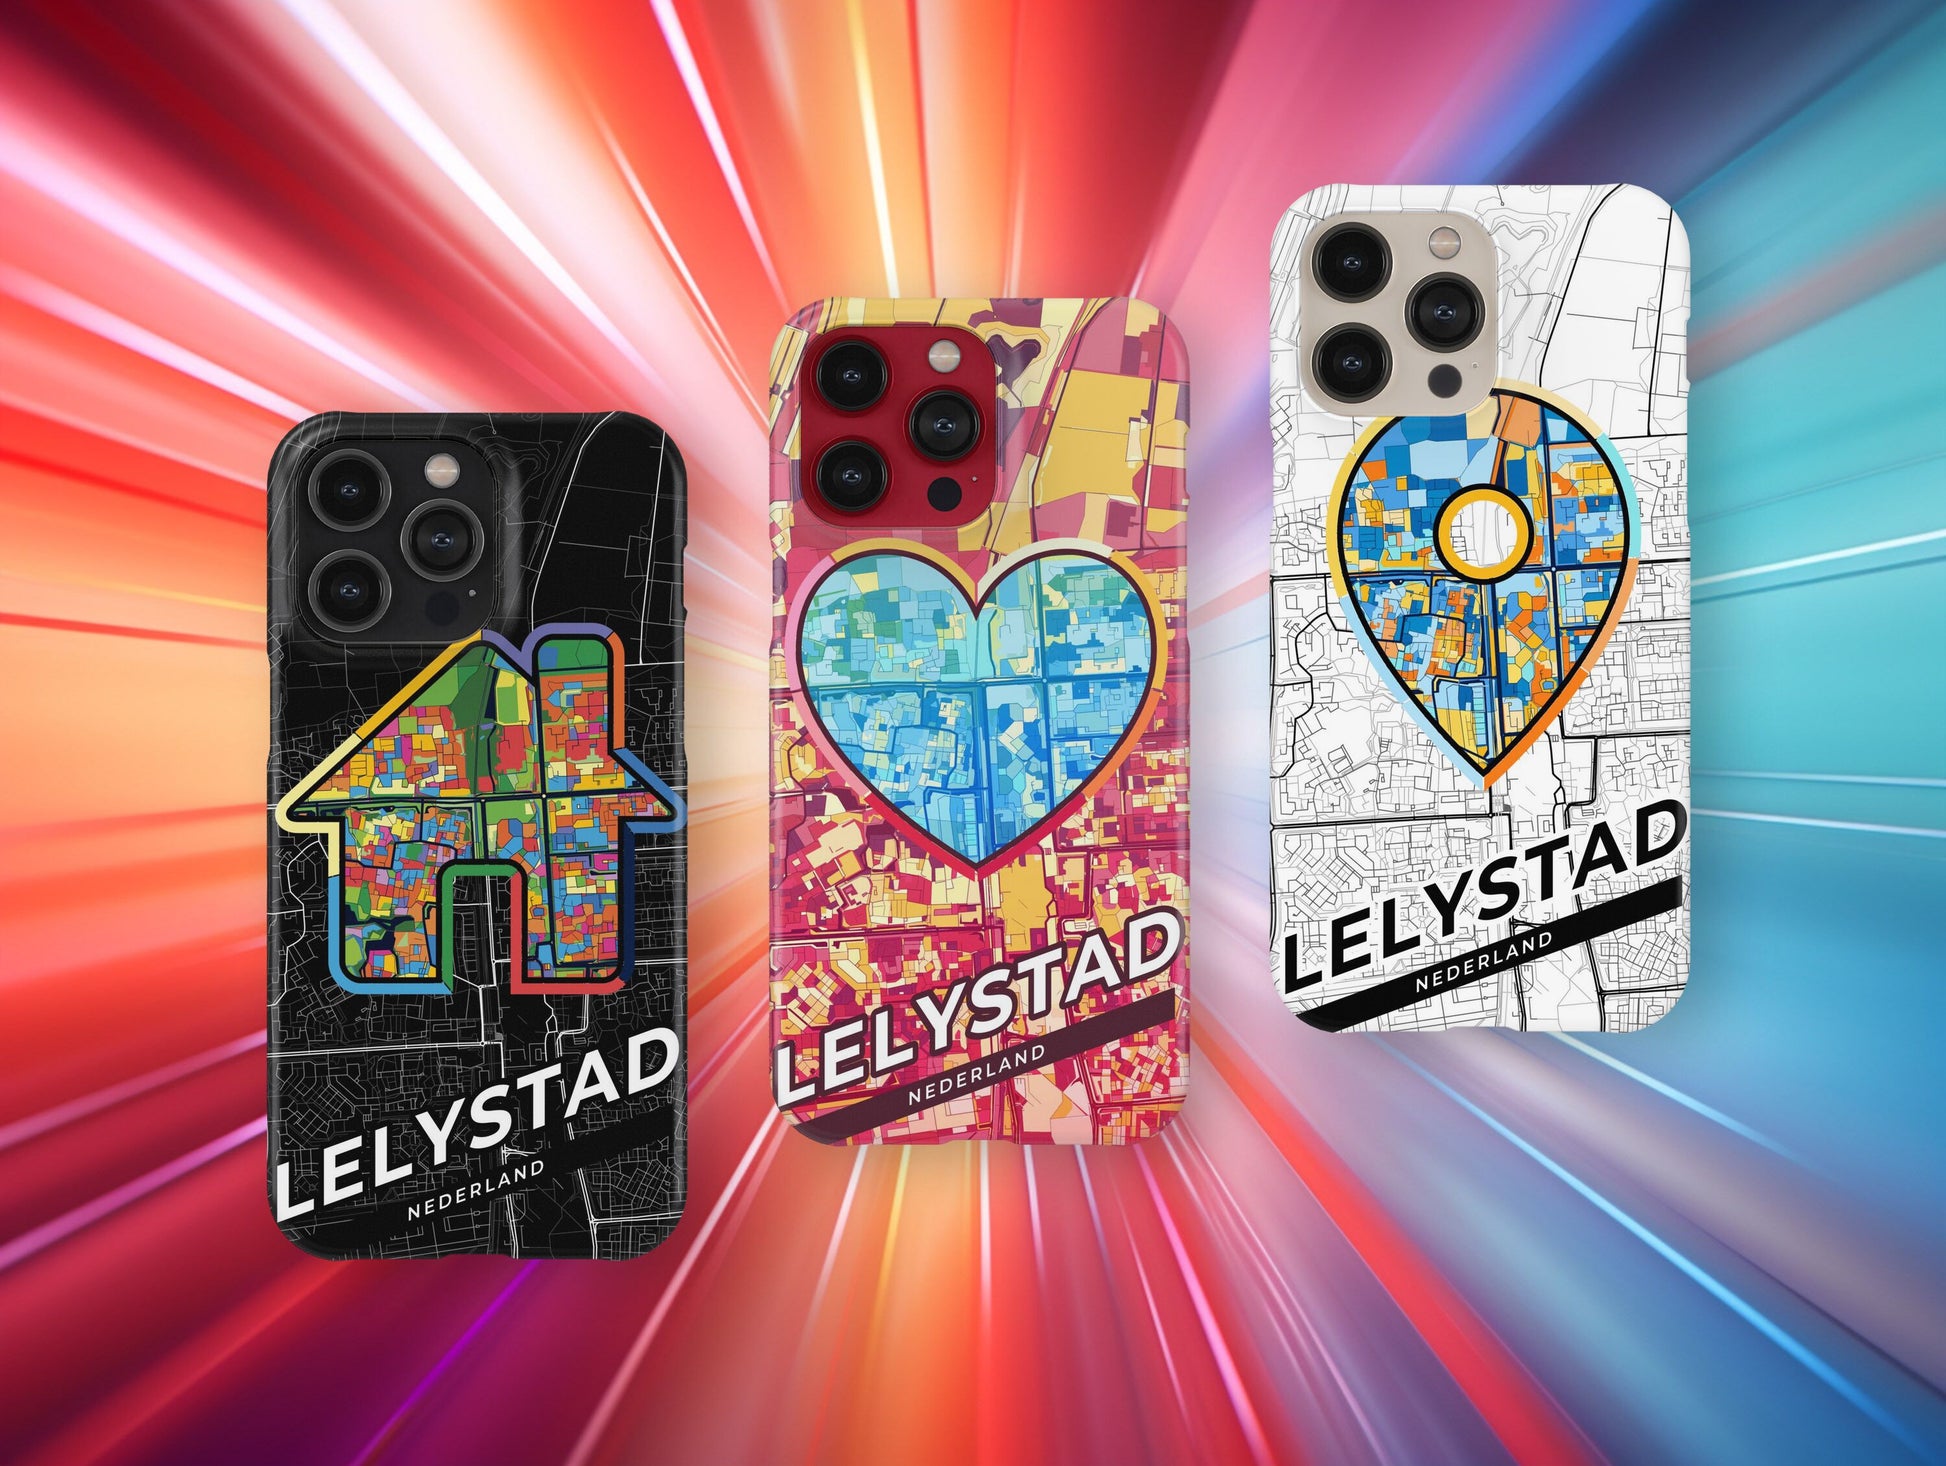 Lelystad Netherlands slim phone case with colorful icon. Birthday, wedding or housewarming gift. Couple match cases.